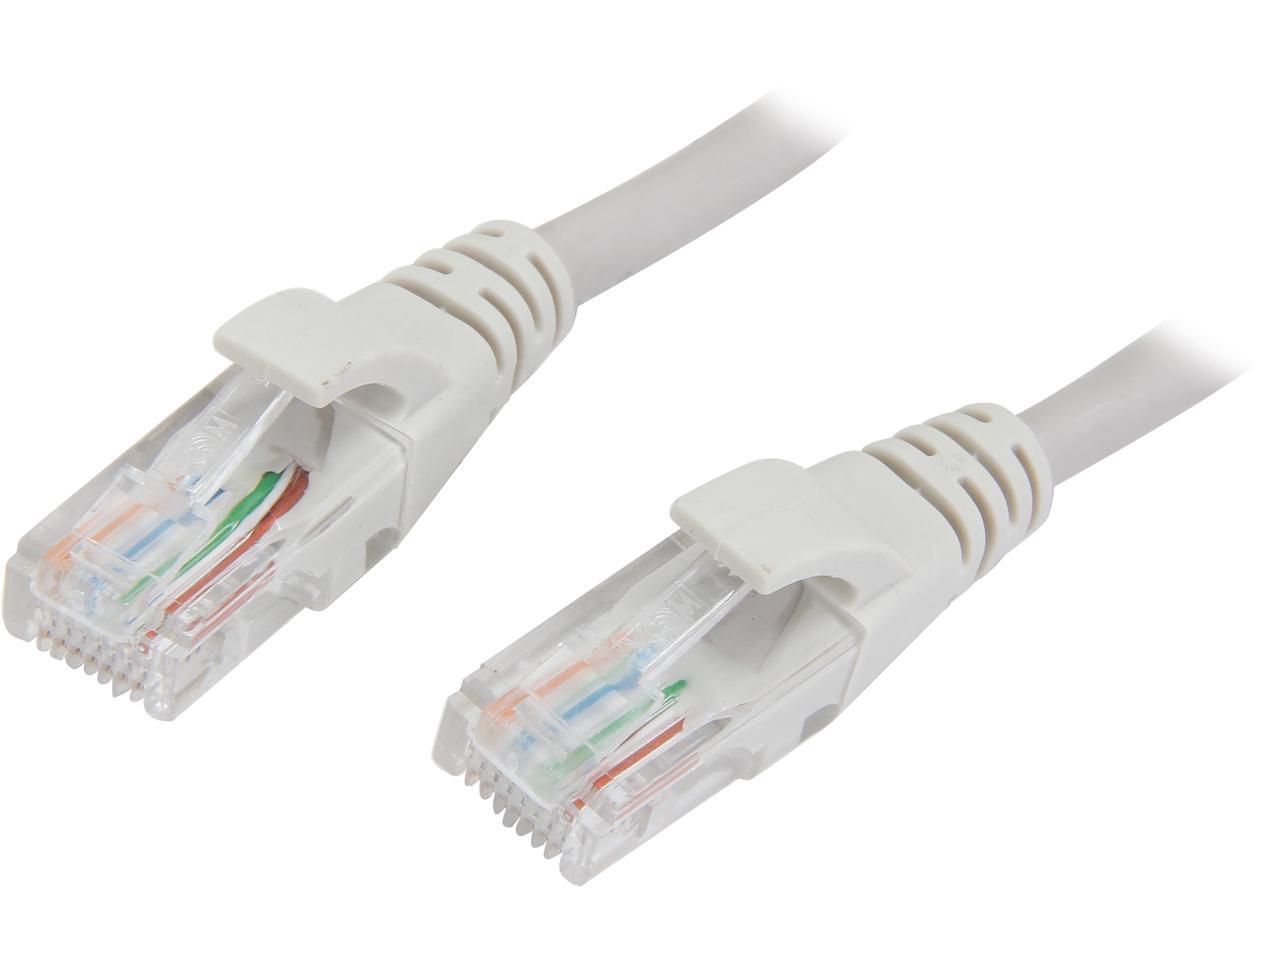 Vcom 1-Feet Cat5E Molded Patch Cable White NP511-1-WHITE 